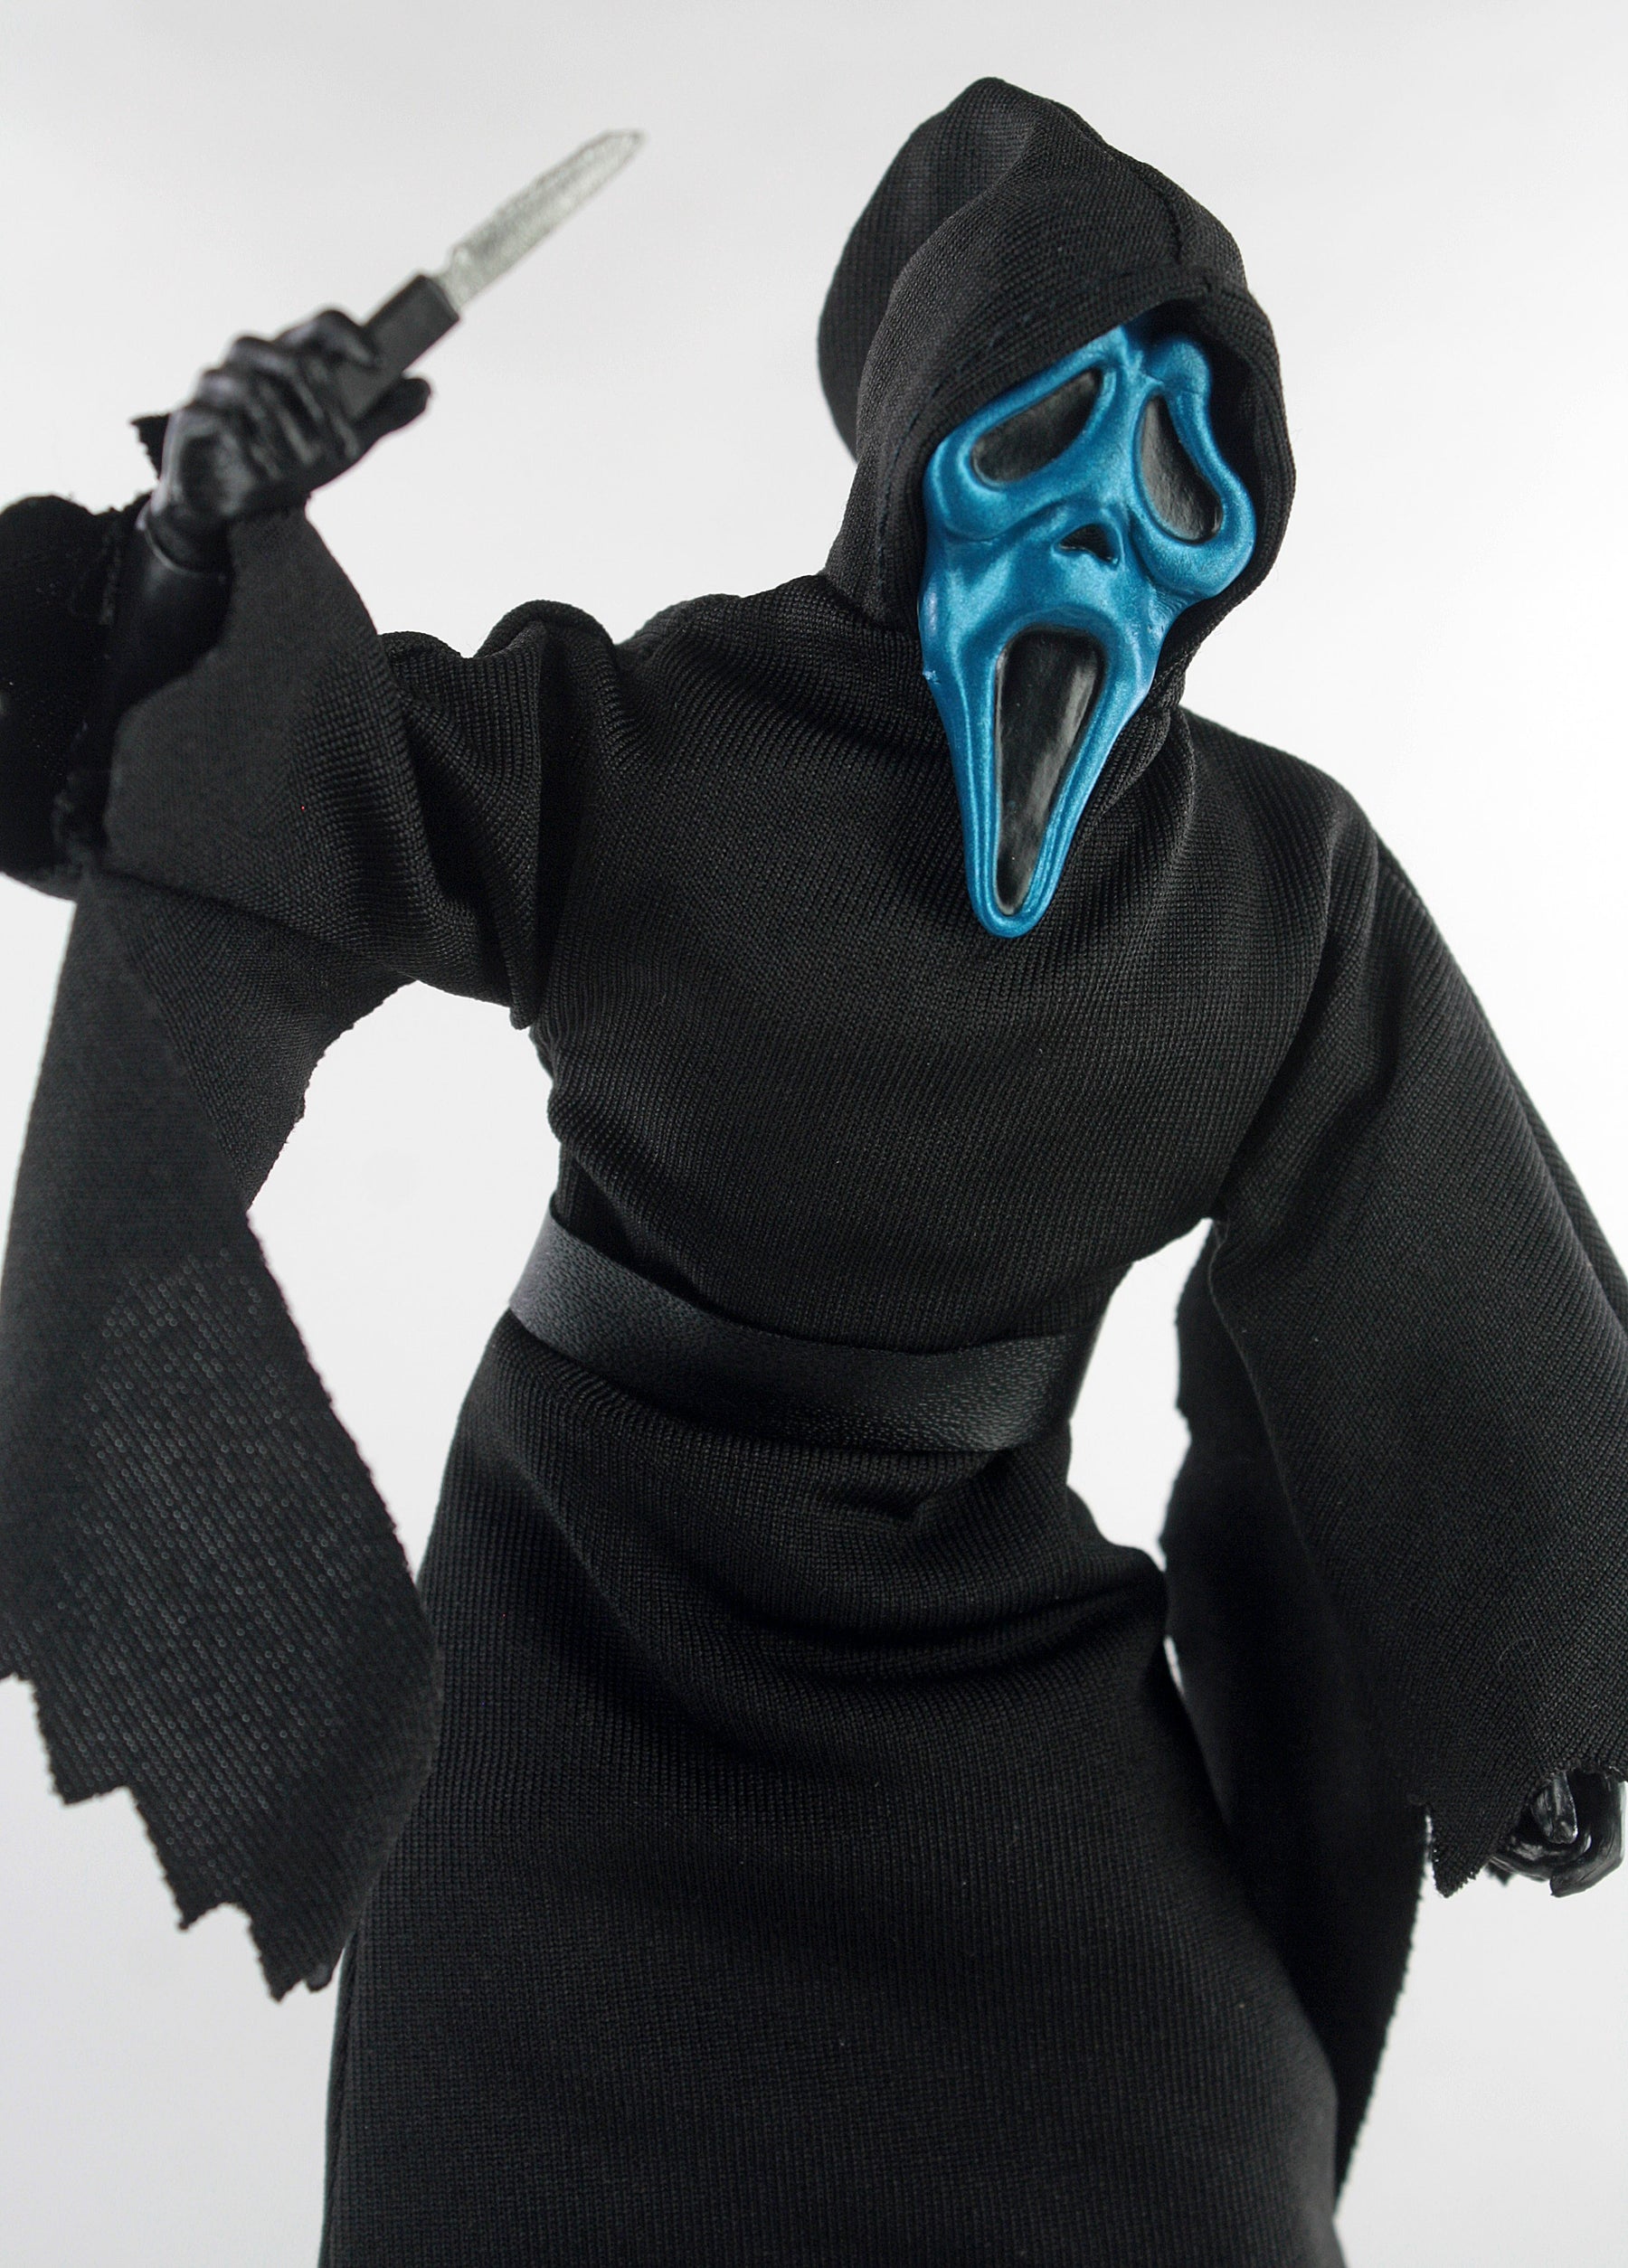 Damaged Package Mego Movies Wave 17 - Ghostface (Assorted Skull Face Colors) 8" Action Figure